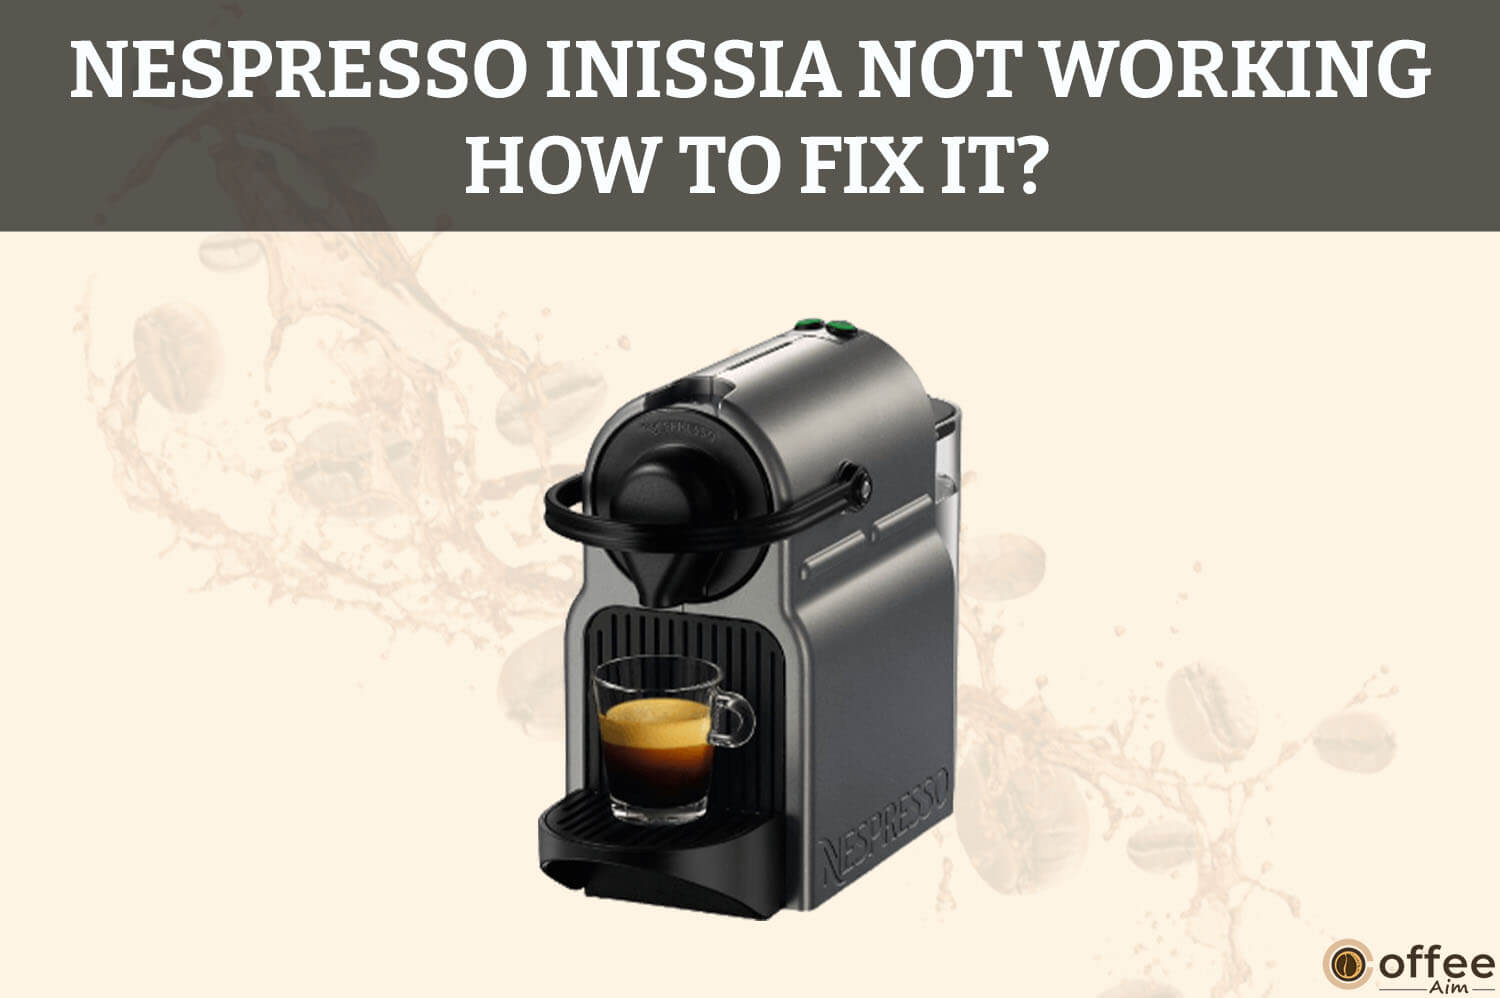 Featured image for the article "Nespresso Inissia Not Working How to Fix It"